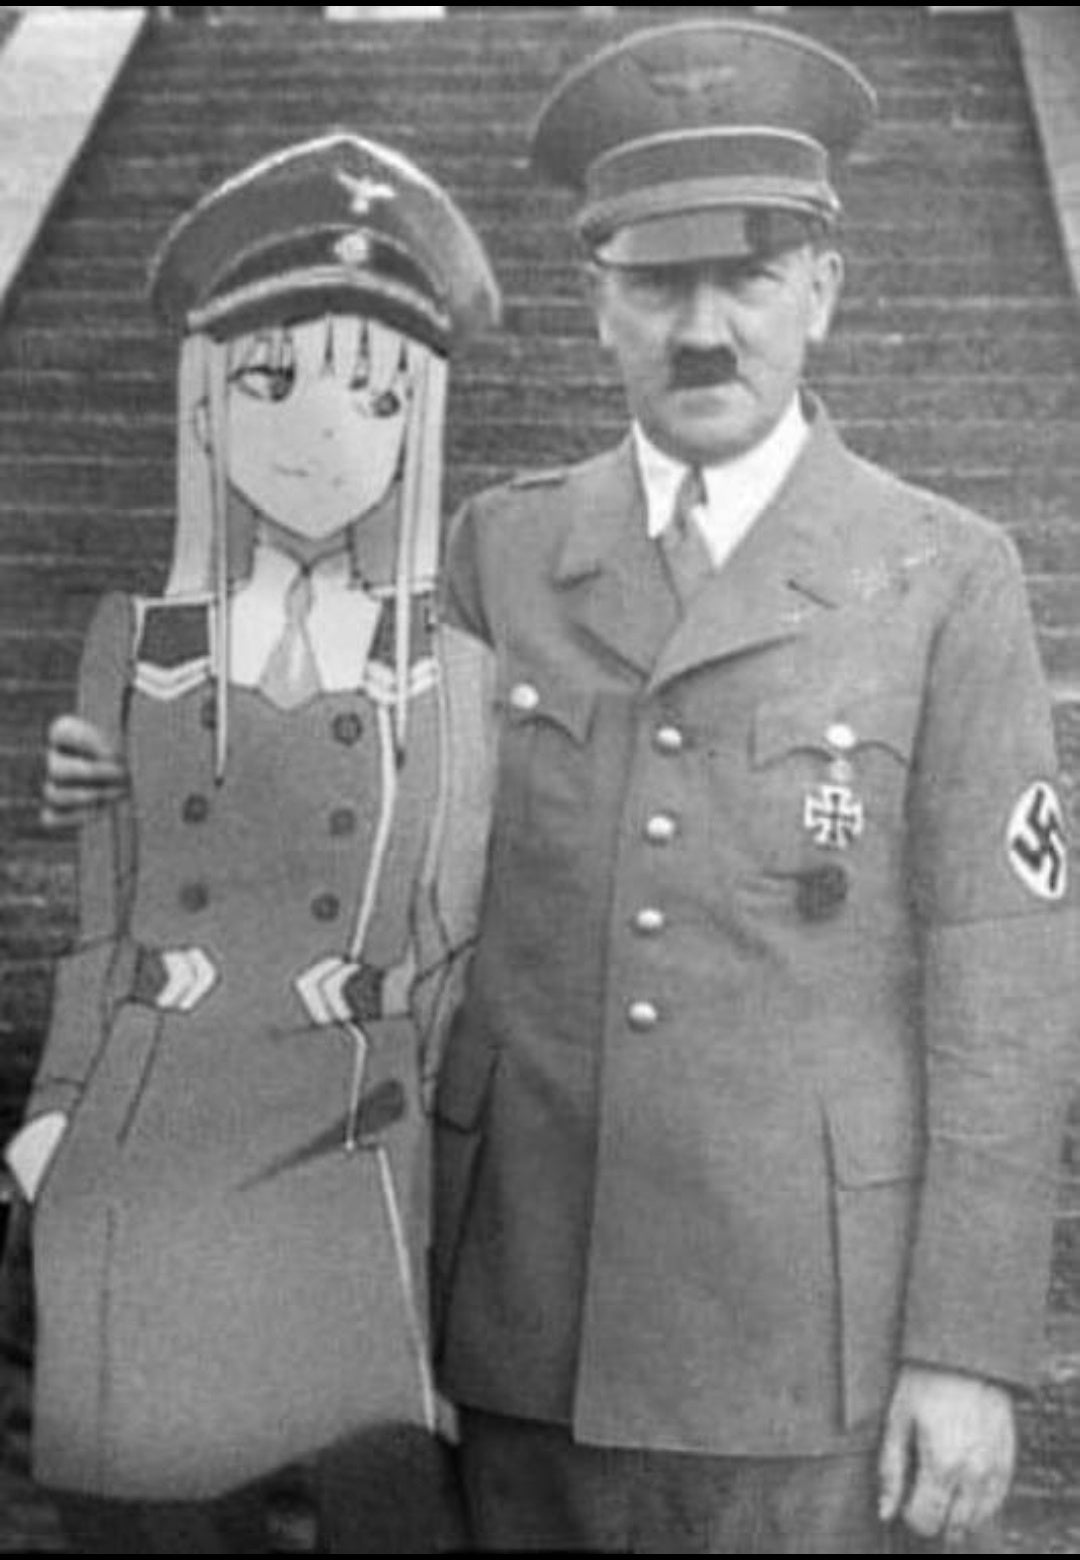 Adolf Hitler pictured with his waifu